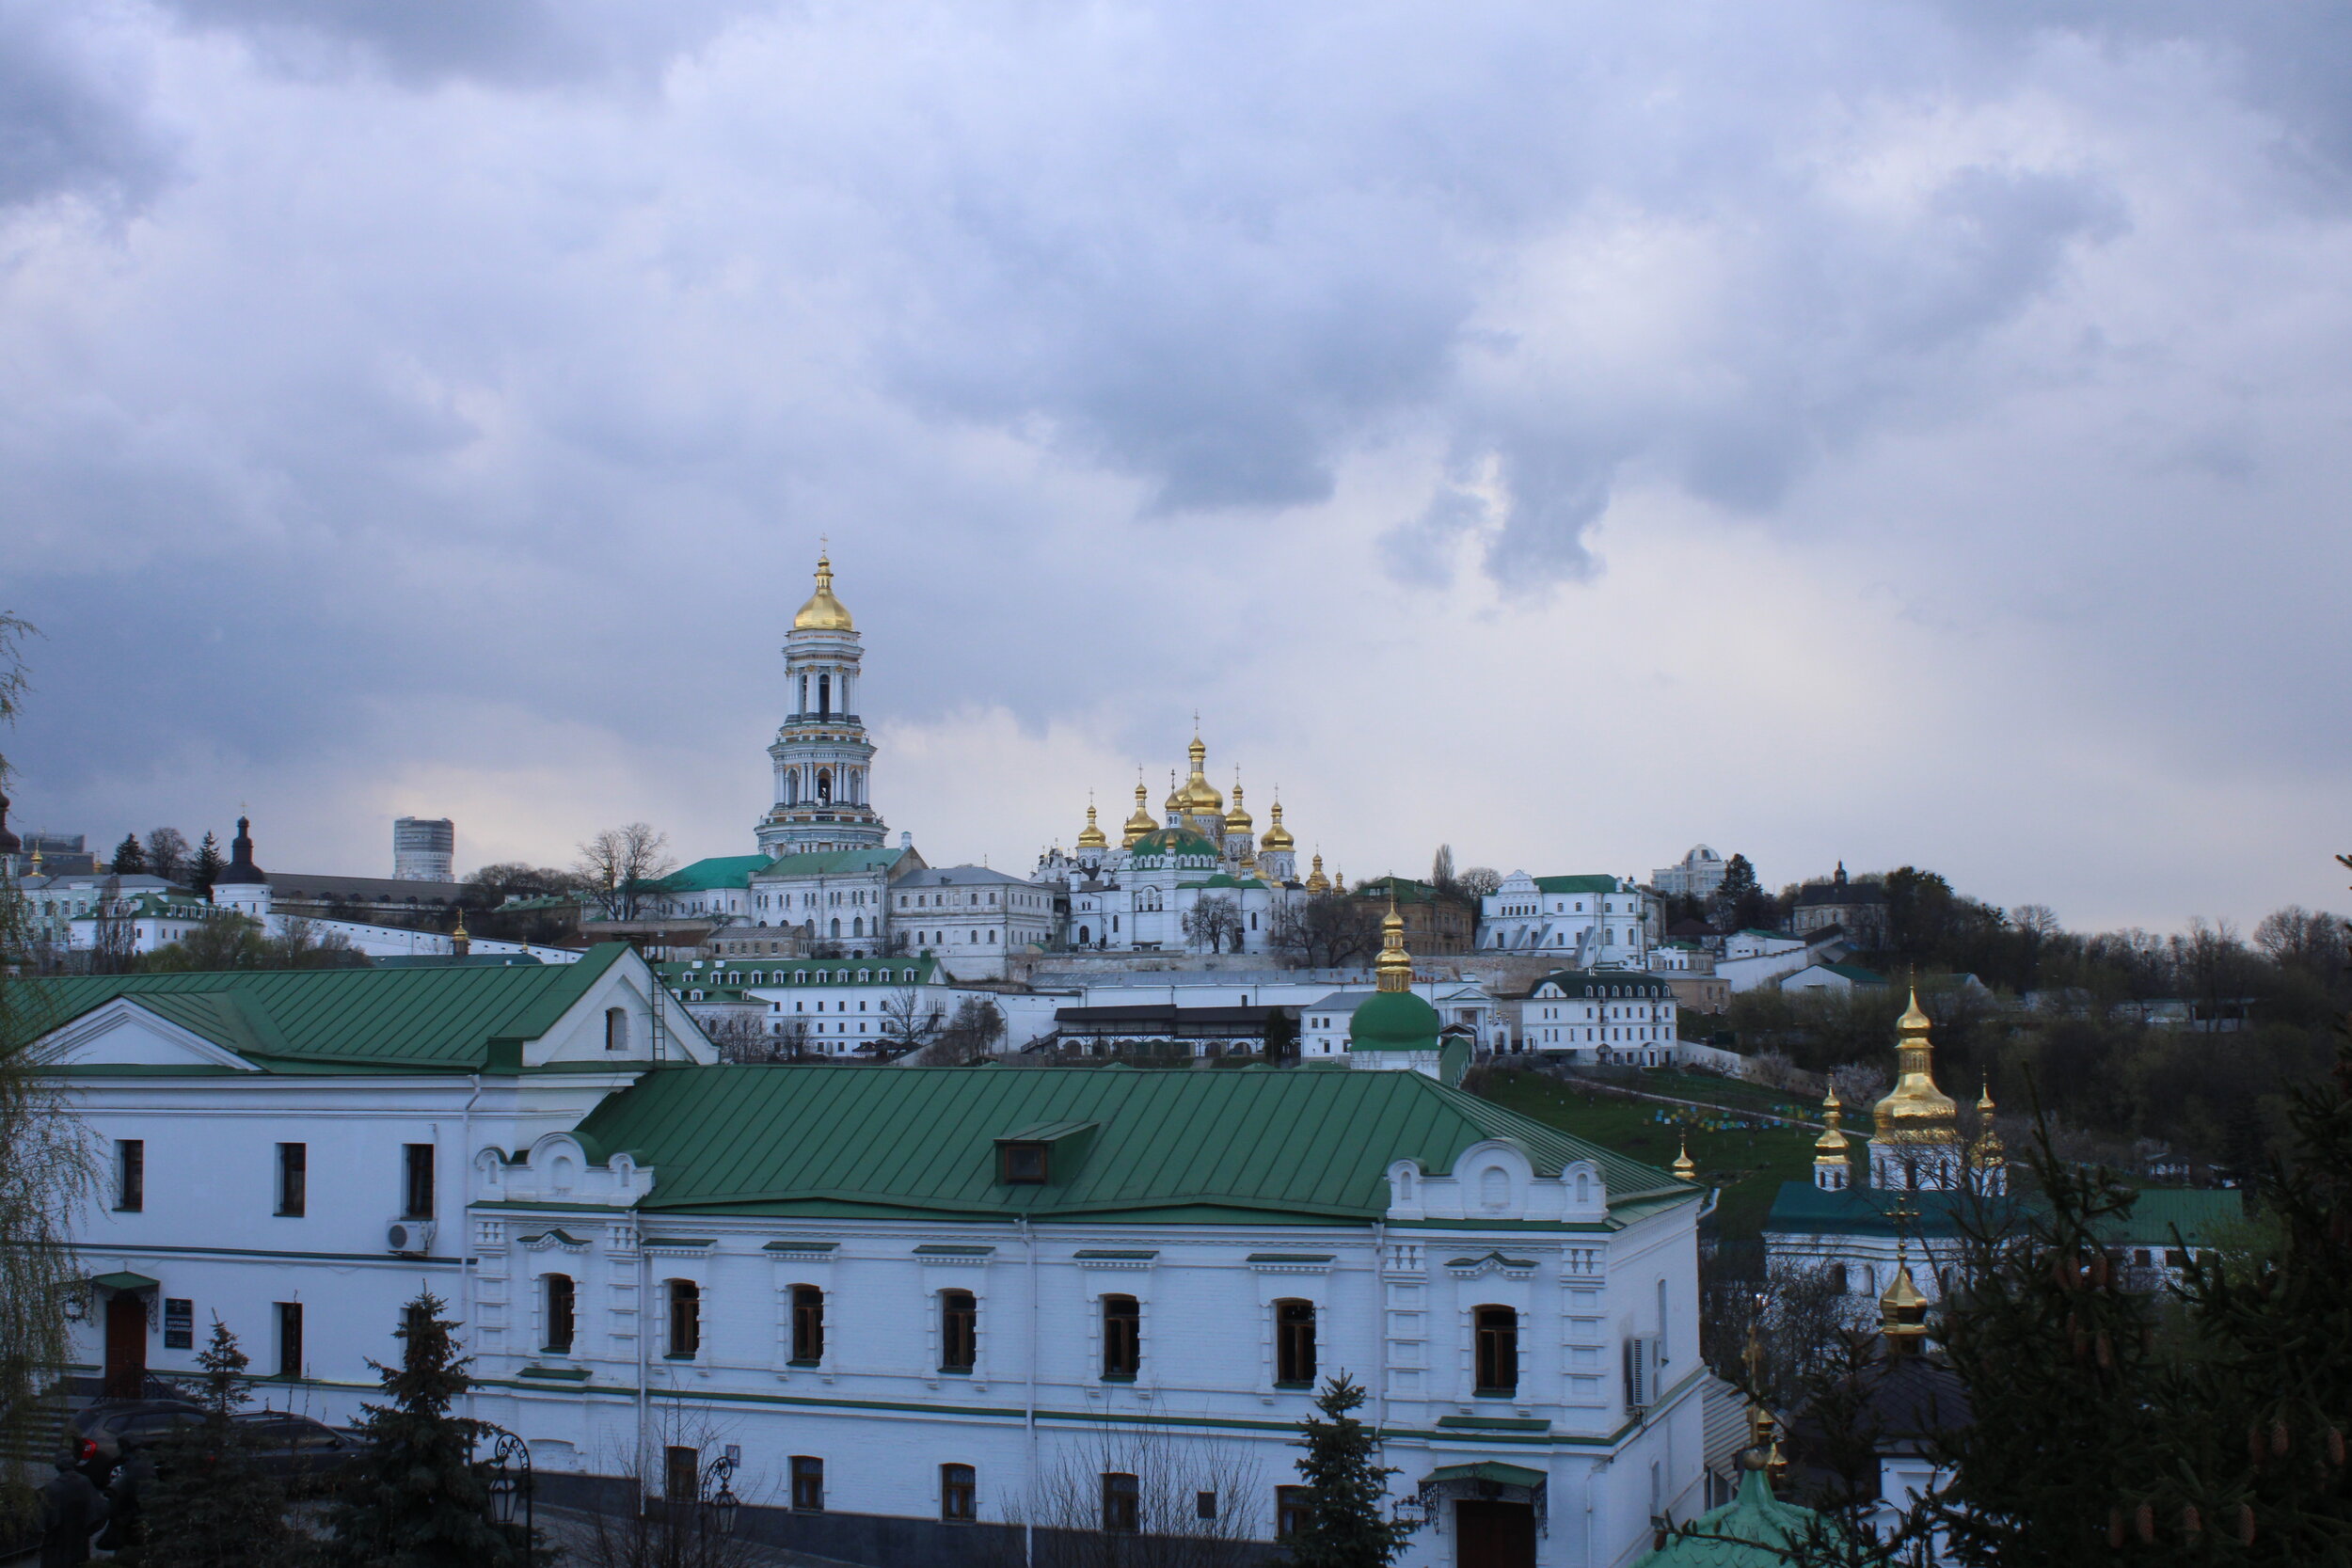   KYIV, Ukraine. April 19th, 2021. PICTURED:  The expanse of golden-domed structures inside Pechersk Lavra, first established in the 1200s. 